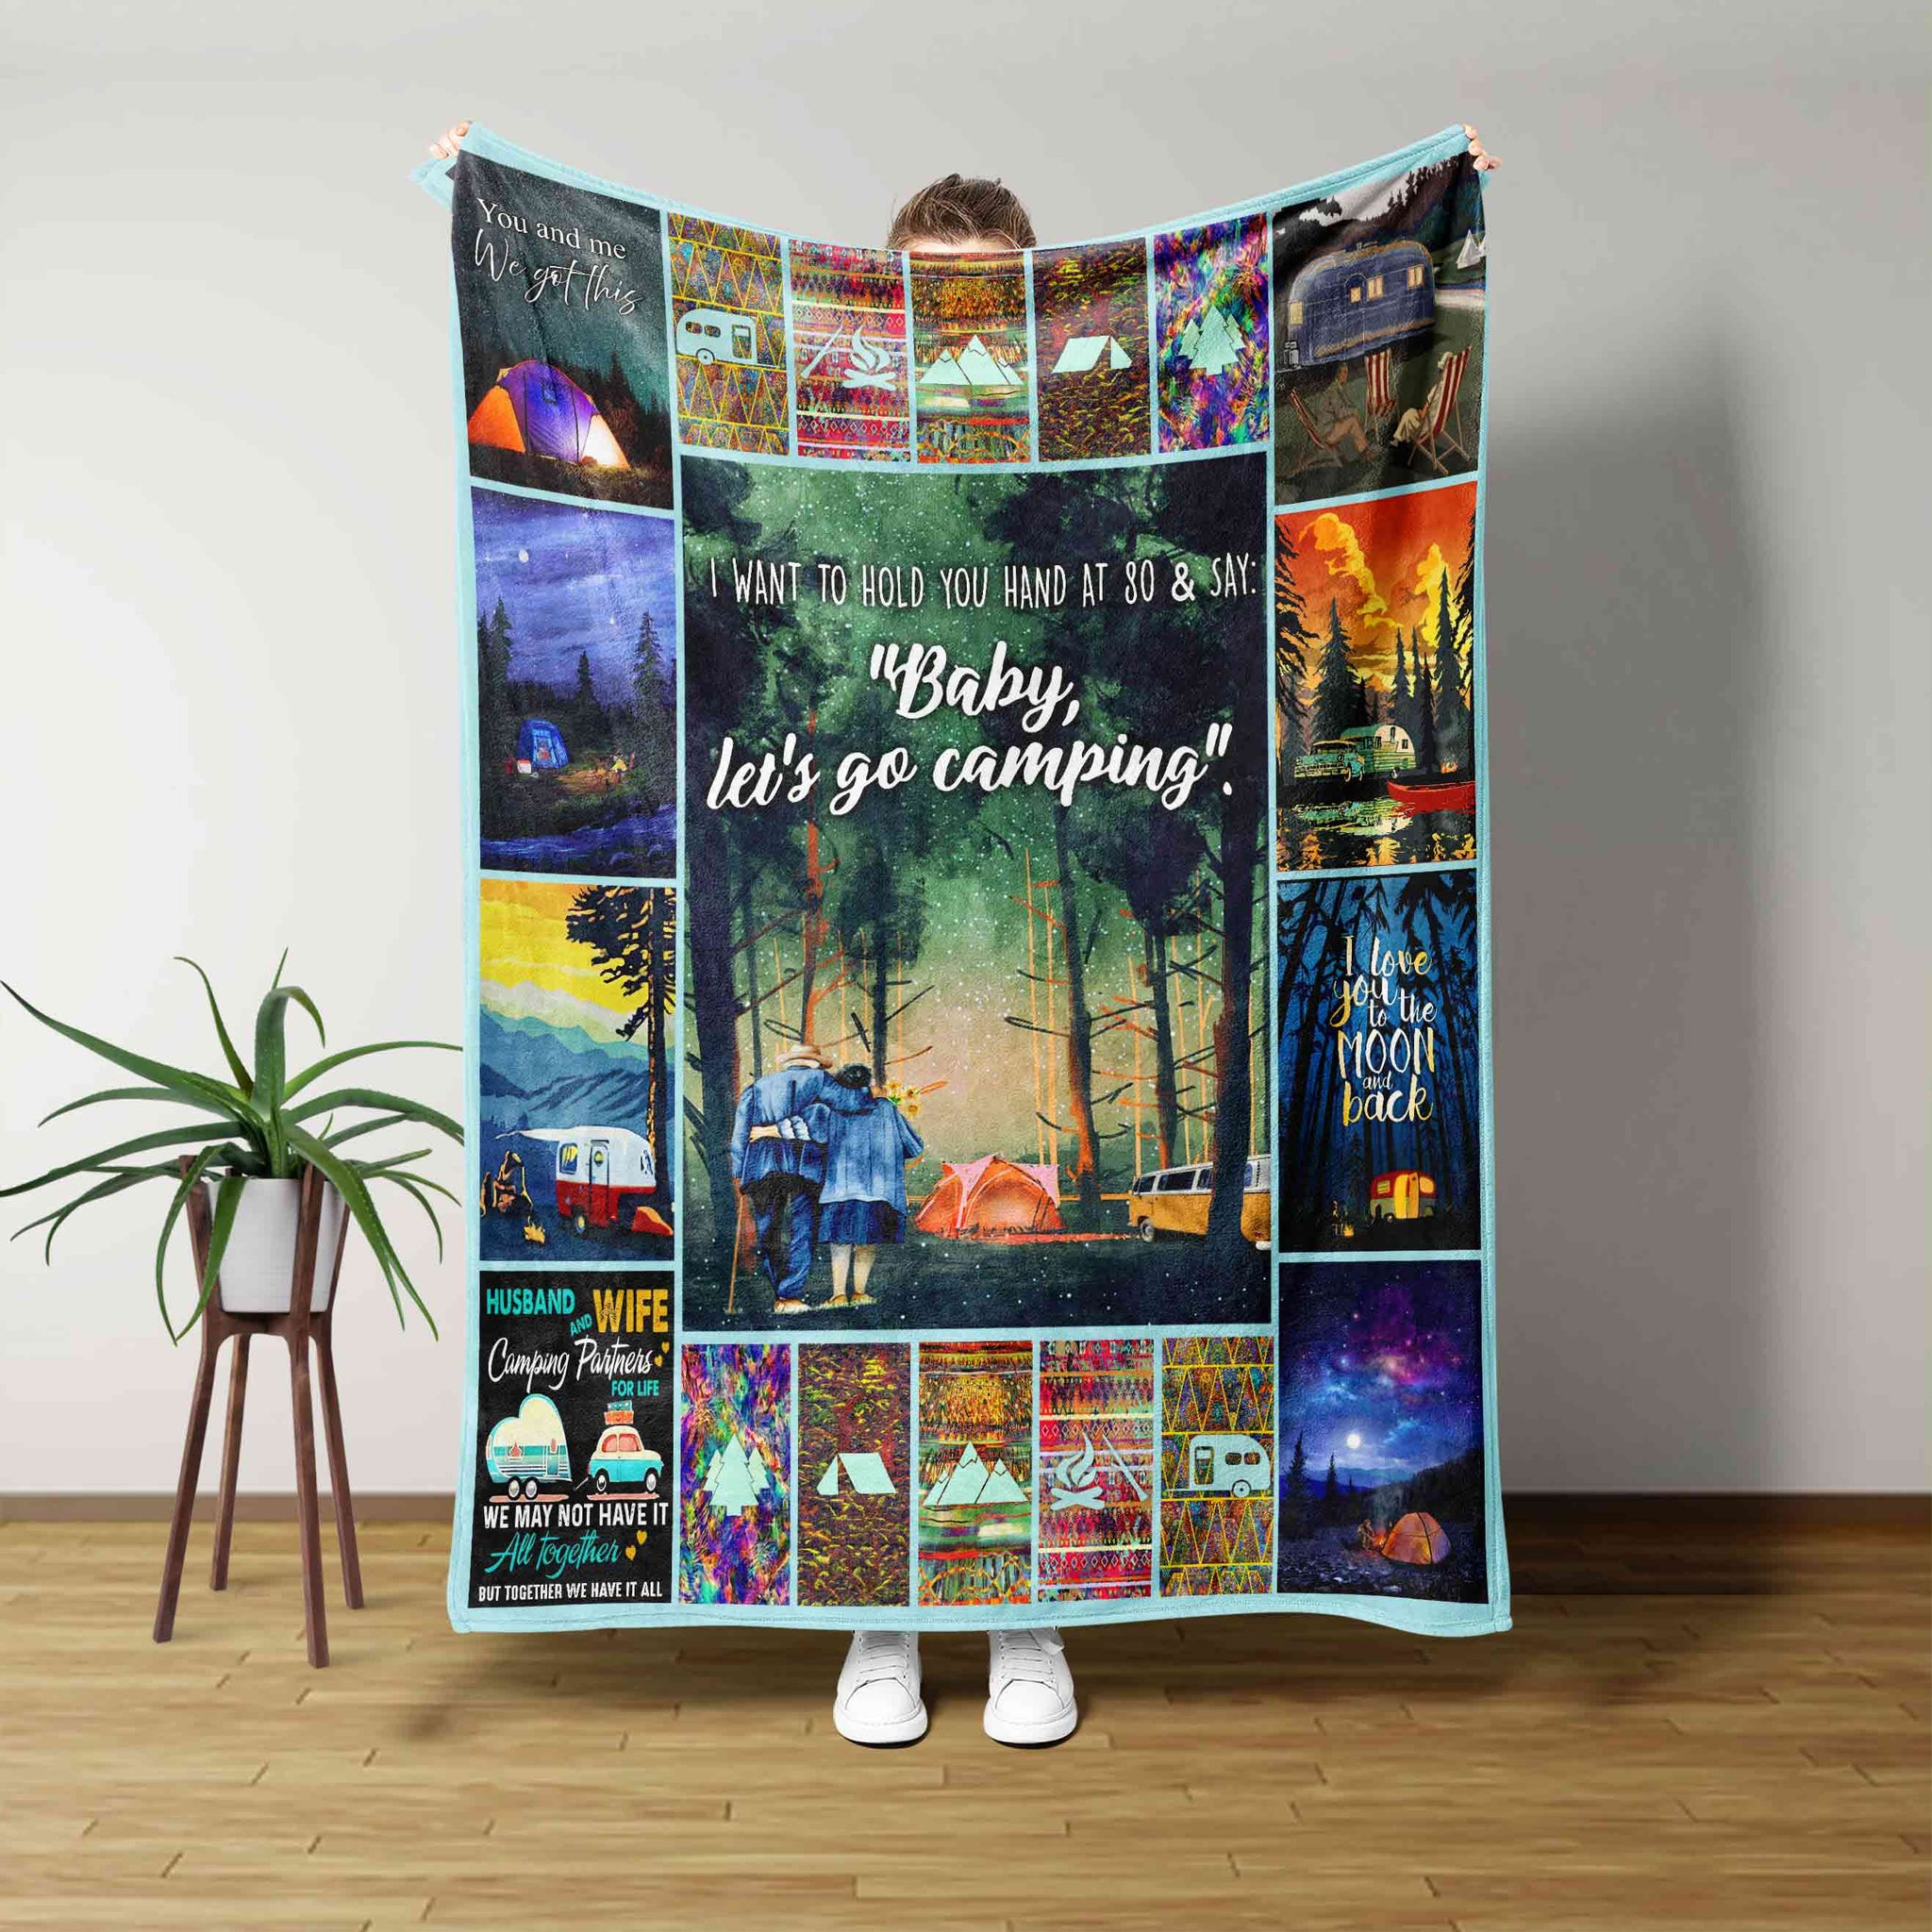 Baby Let's Go Camping Blanket, Old Couple Blanket, Camping Blanket, Forest Blanket, Family Blanket, Gift Blanket